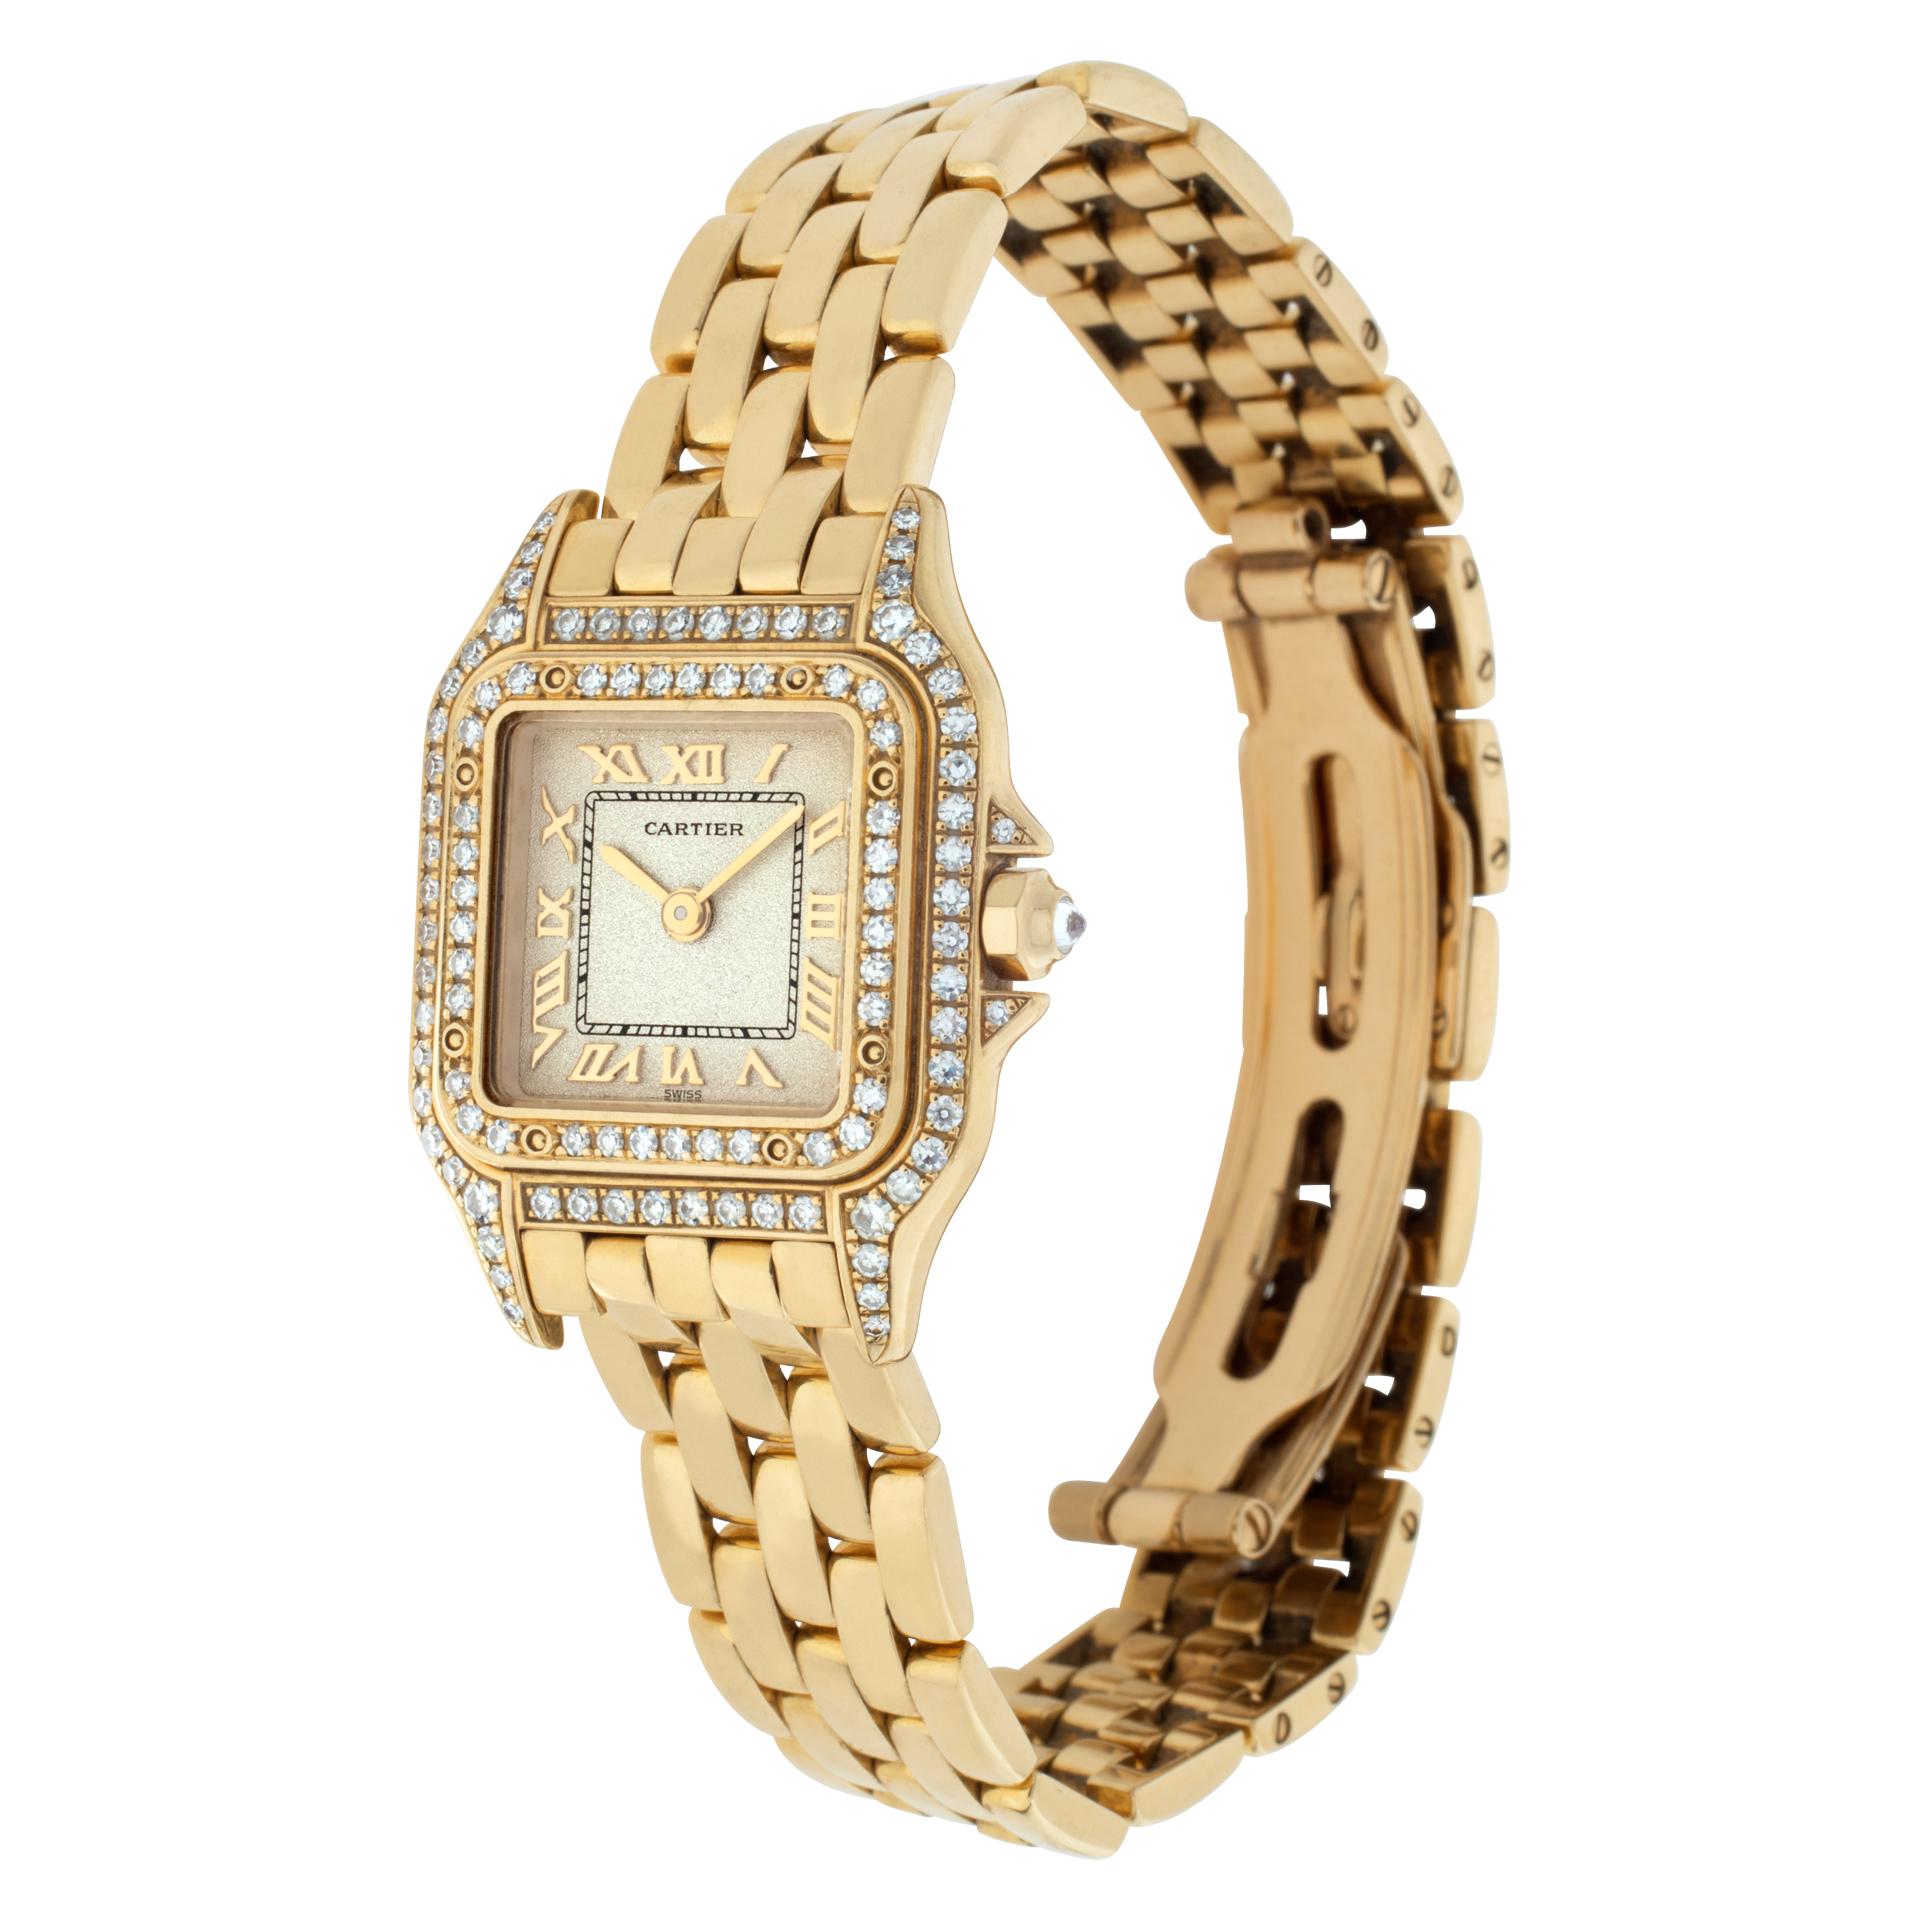 Cartier Panthere in 18k yellow gold with original diamond bezel, lugs and case. Quartz. 22 mm case size. Ref WF3072B9. Circa 2000s. Fine Pre-owned Cartier Watch. Certified preowned Dress Cartier Panthere WF3072B9 watch is made out of yellow gold on